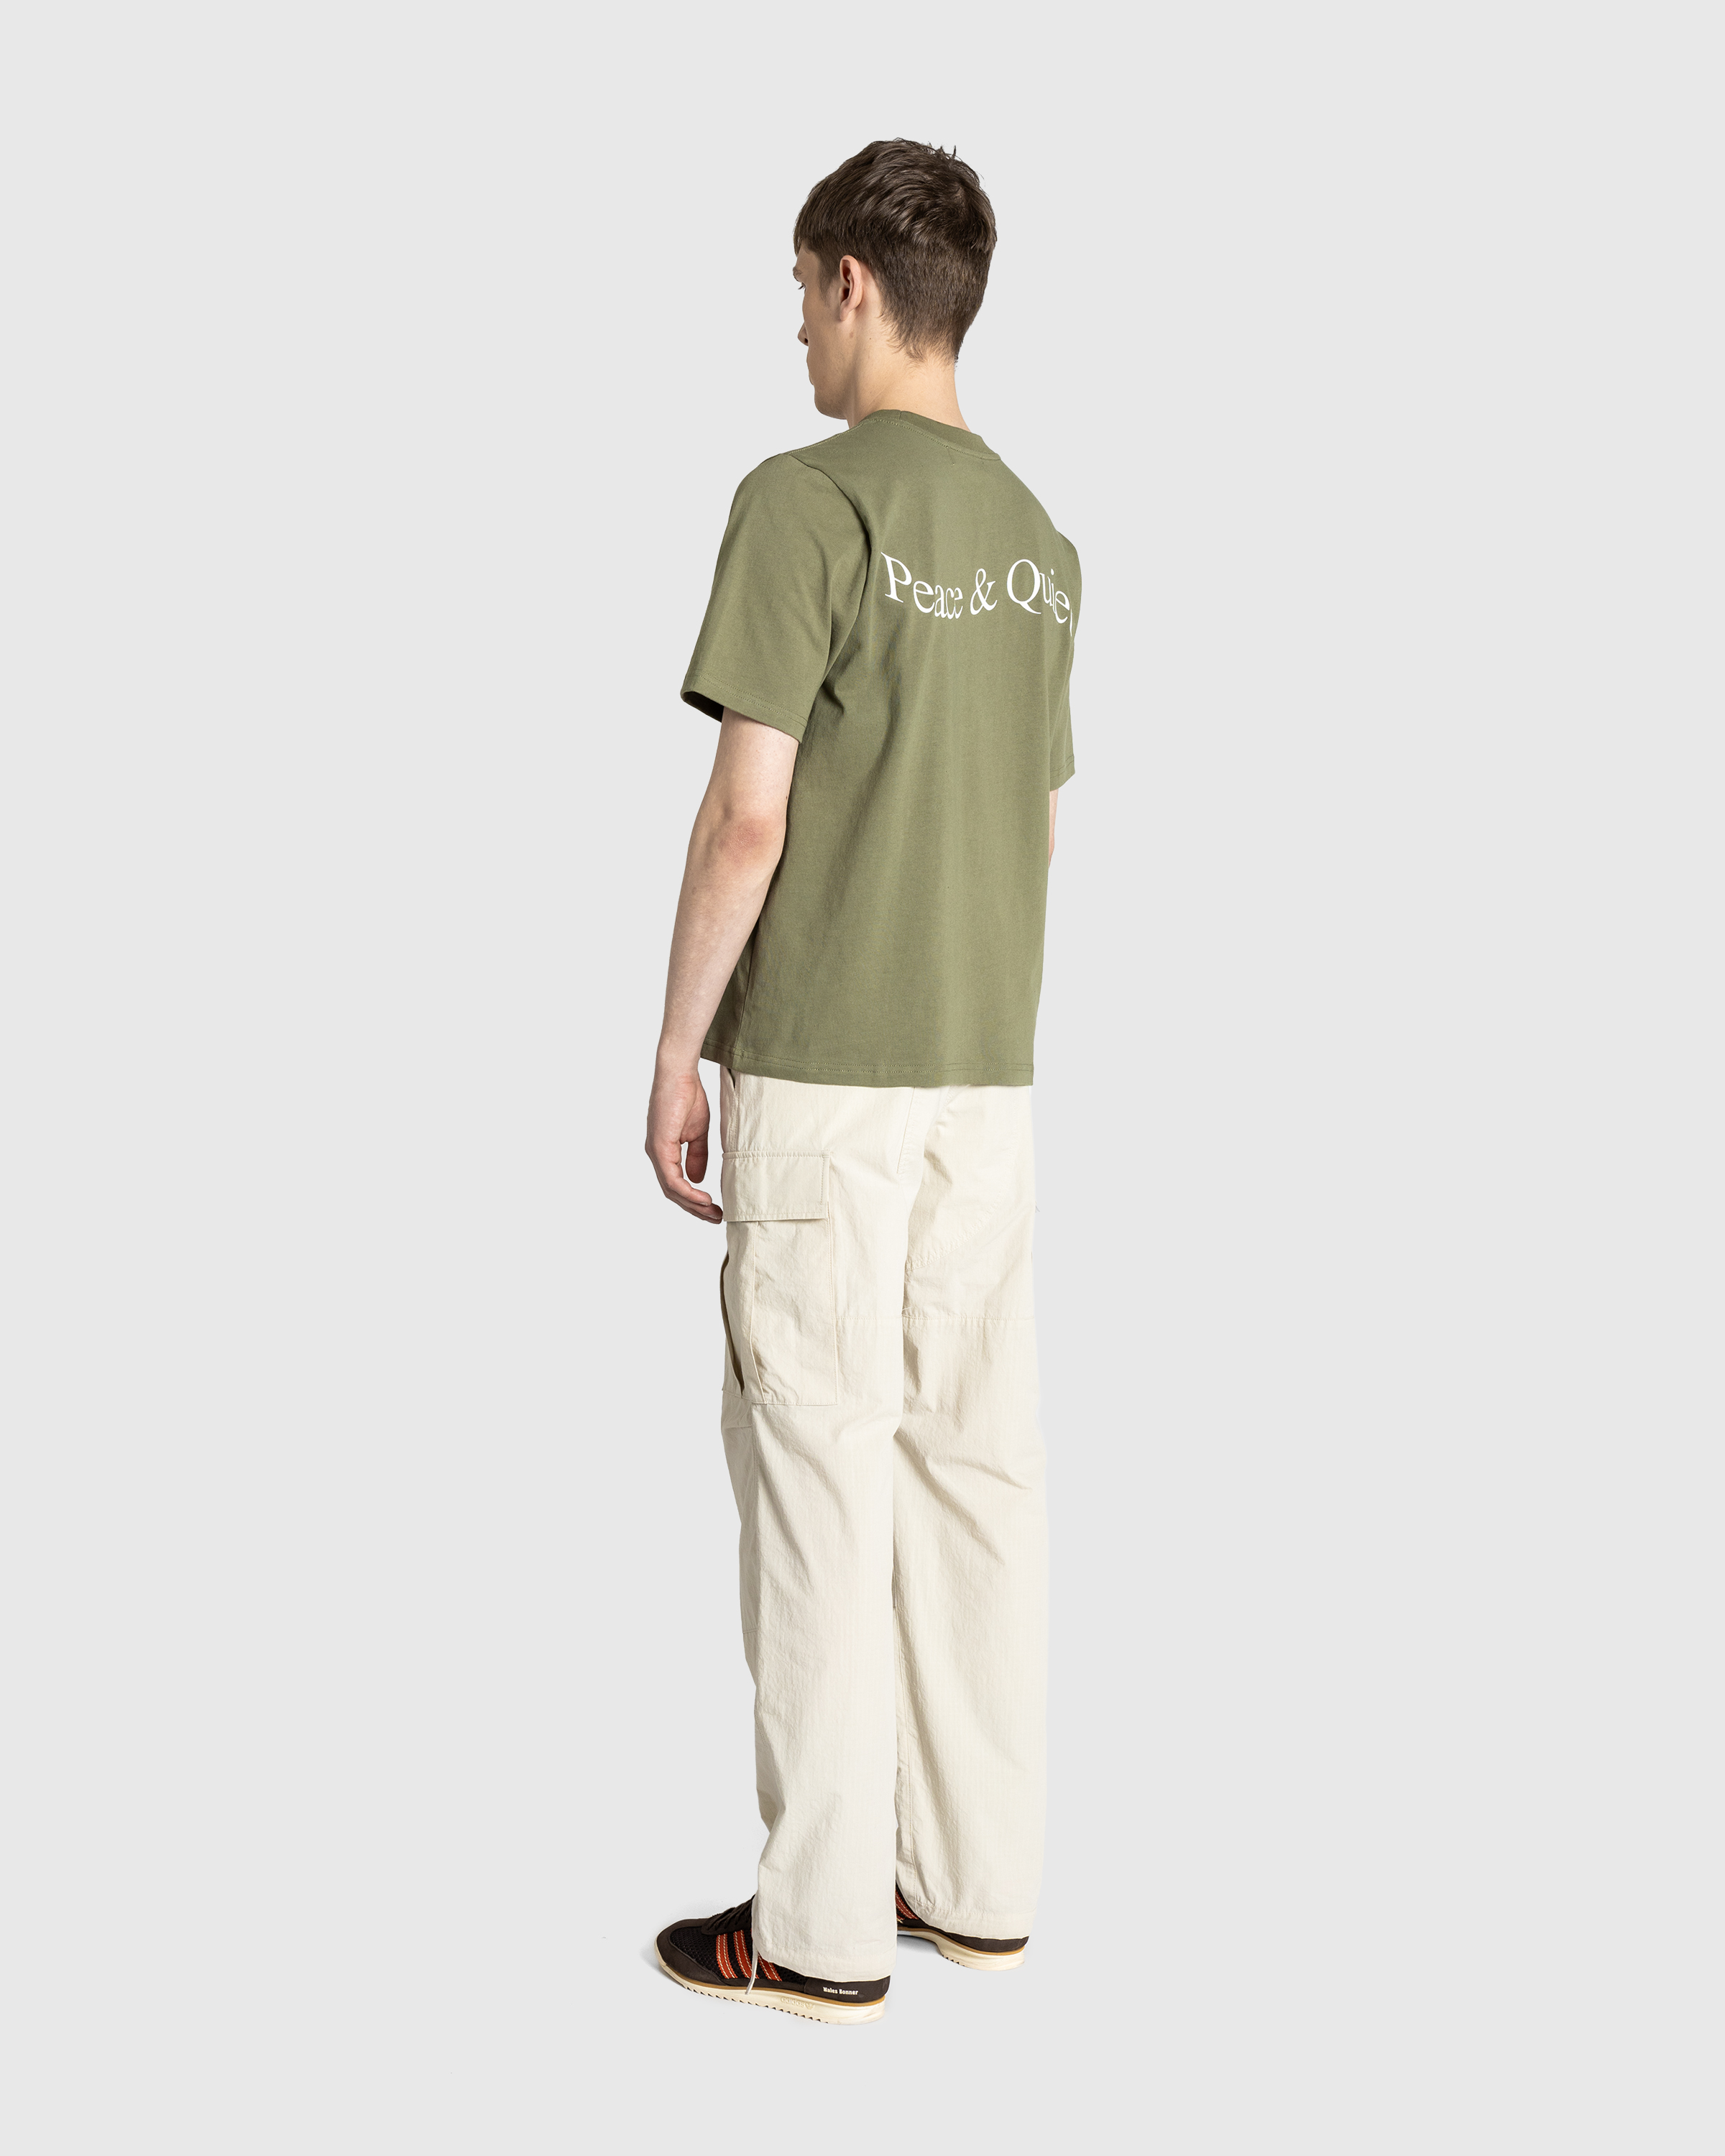 Museum of Peace & Quiet – Wordmark T-Shirt Olive - T-Shirts - Green - Image 4